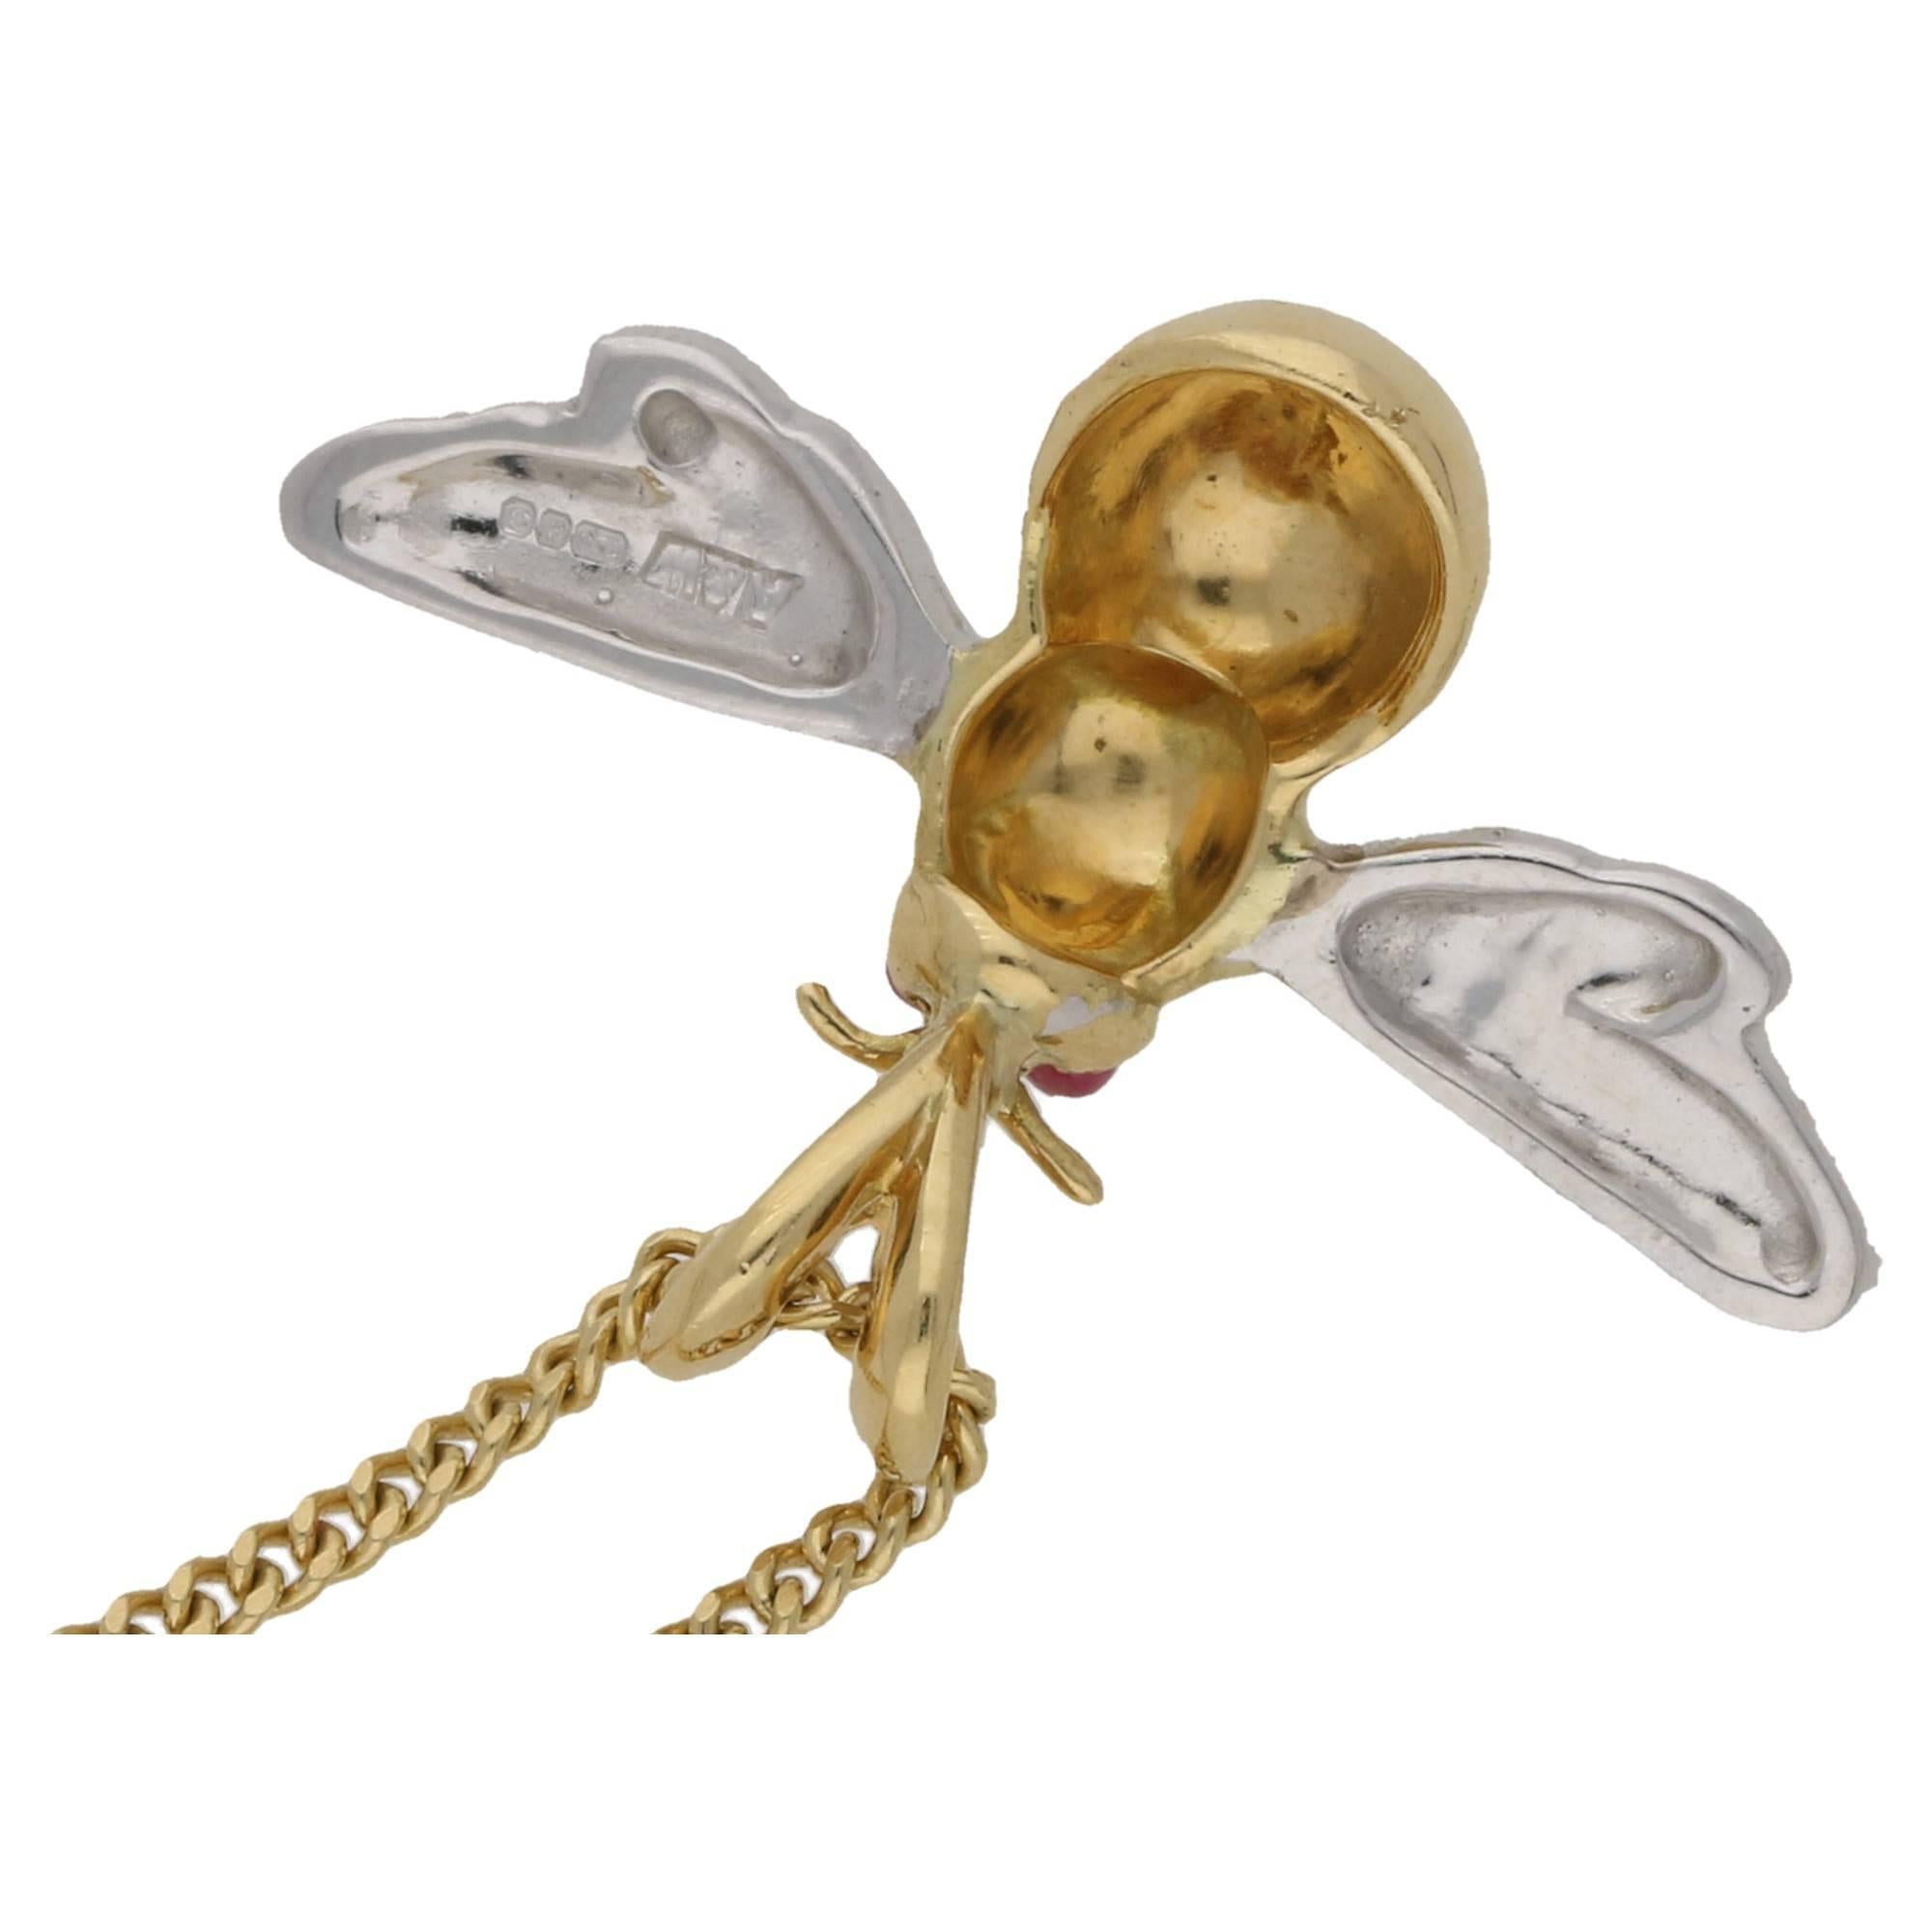 A sweet 18k gold bee pendant, with fine detailing on the body and wings. The eyes are made from vibrant red cabochon cut rubies.  In a wonderfully contrasting mixture of white and yellow gold; this pendant measures 30mm xs 20mm. It hangs on a neat